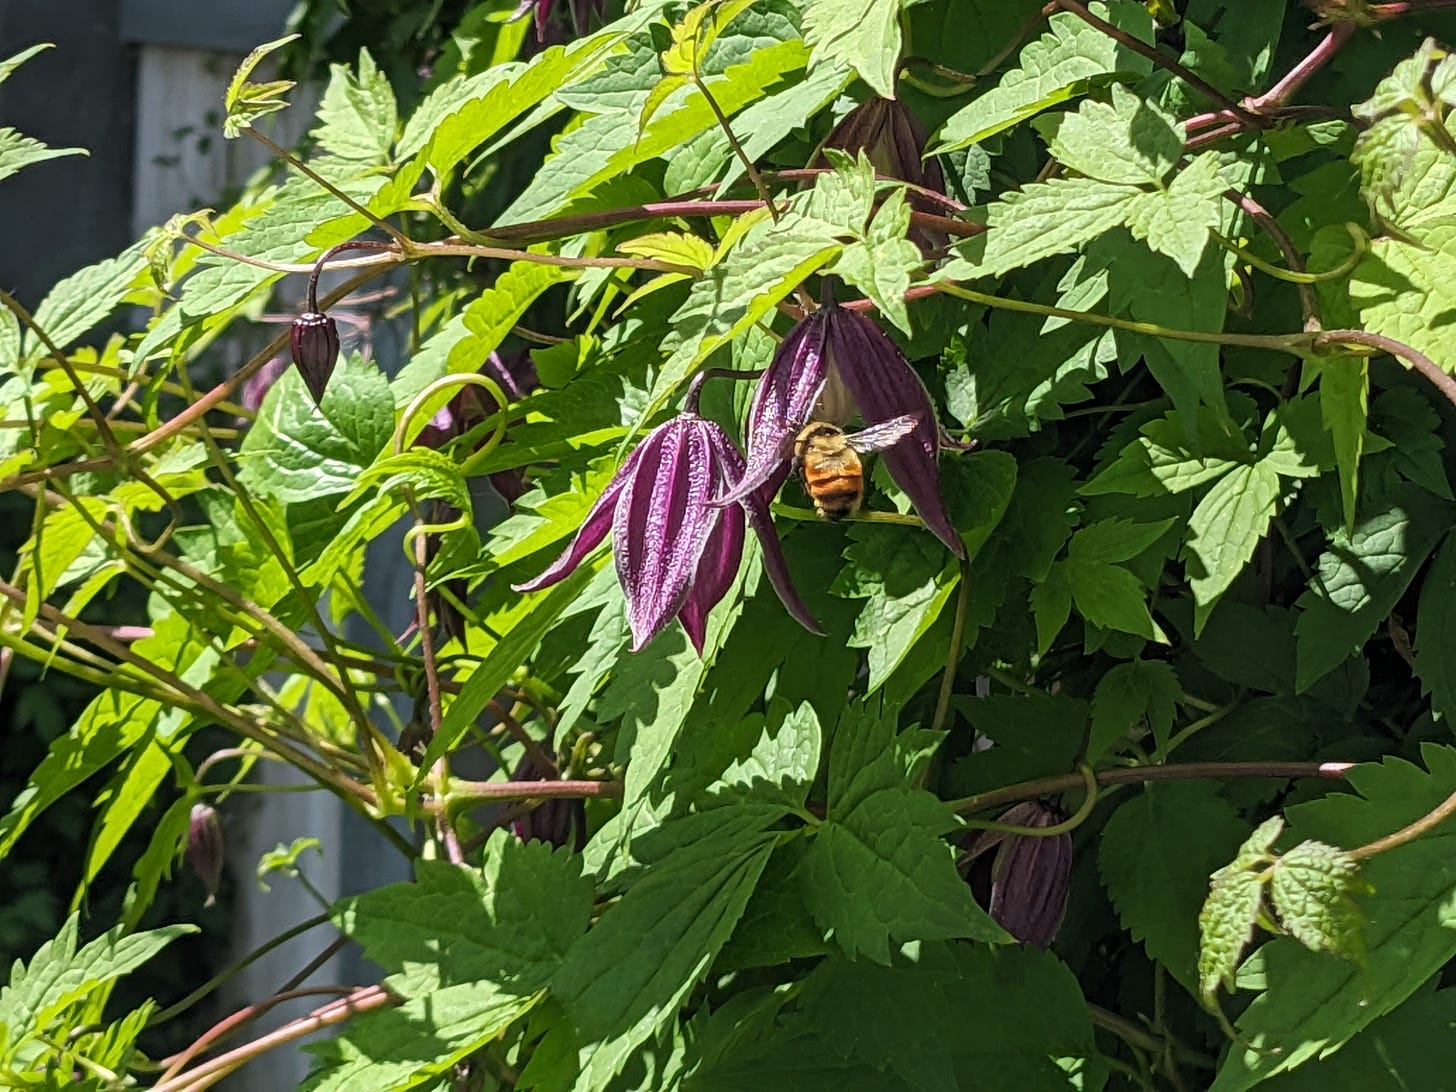 a bee flies in the center of a photo across two purple clematis flowers. the rest of the photo is filled with green leaves from the plant. the bees wings have been caught motionless in the photo and catch sunshine as they stick out from its body at an upward 'v' angle